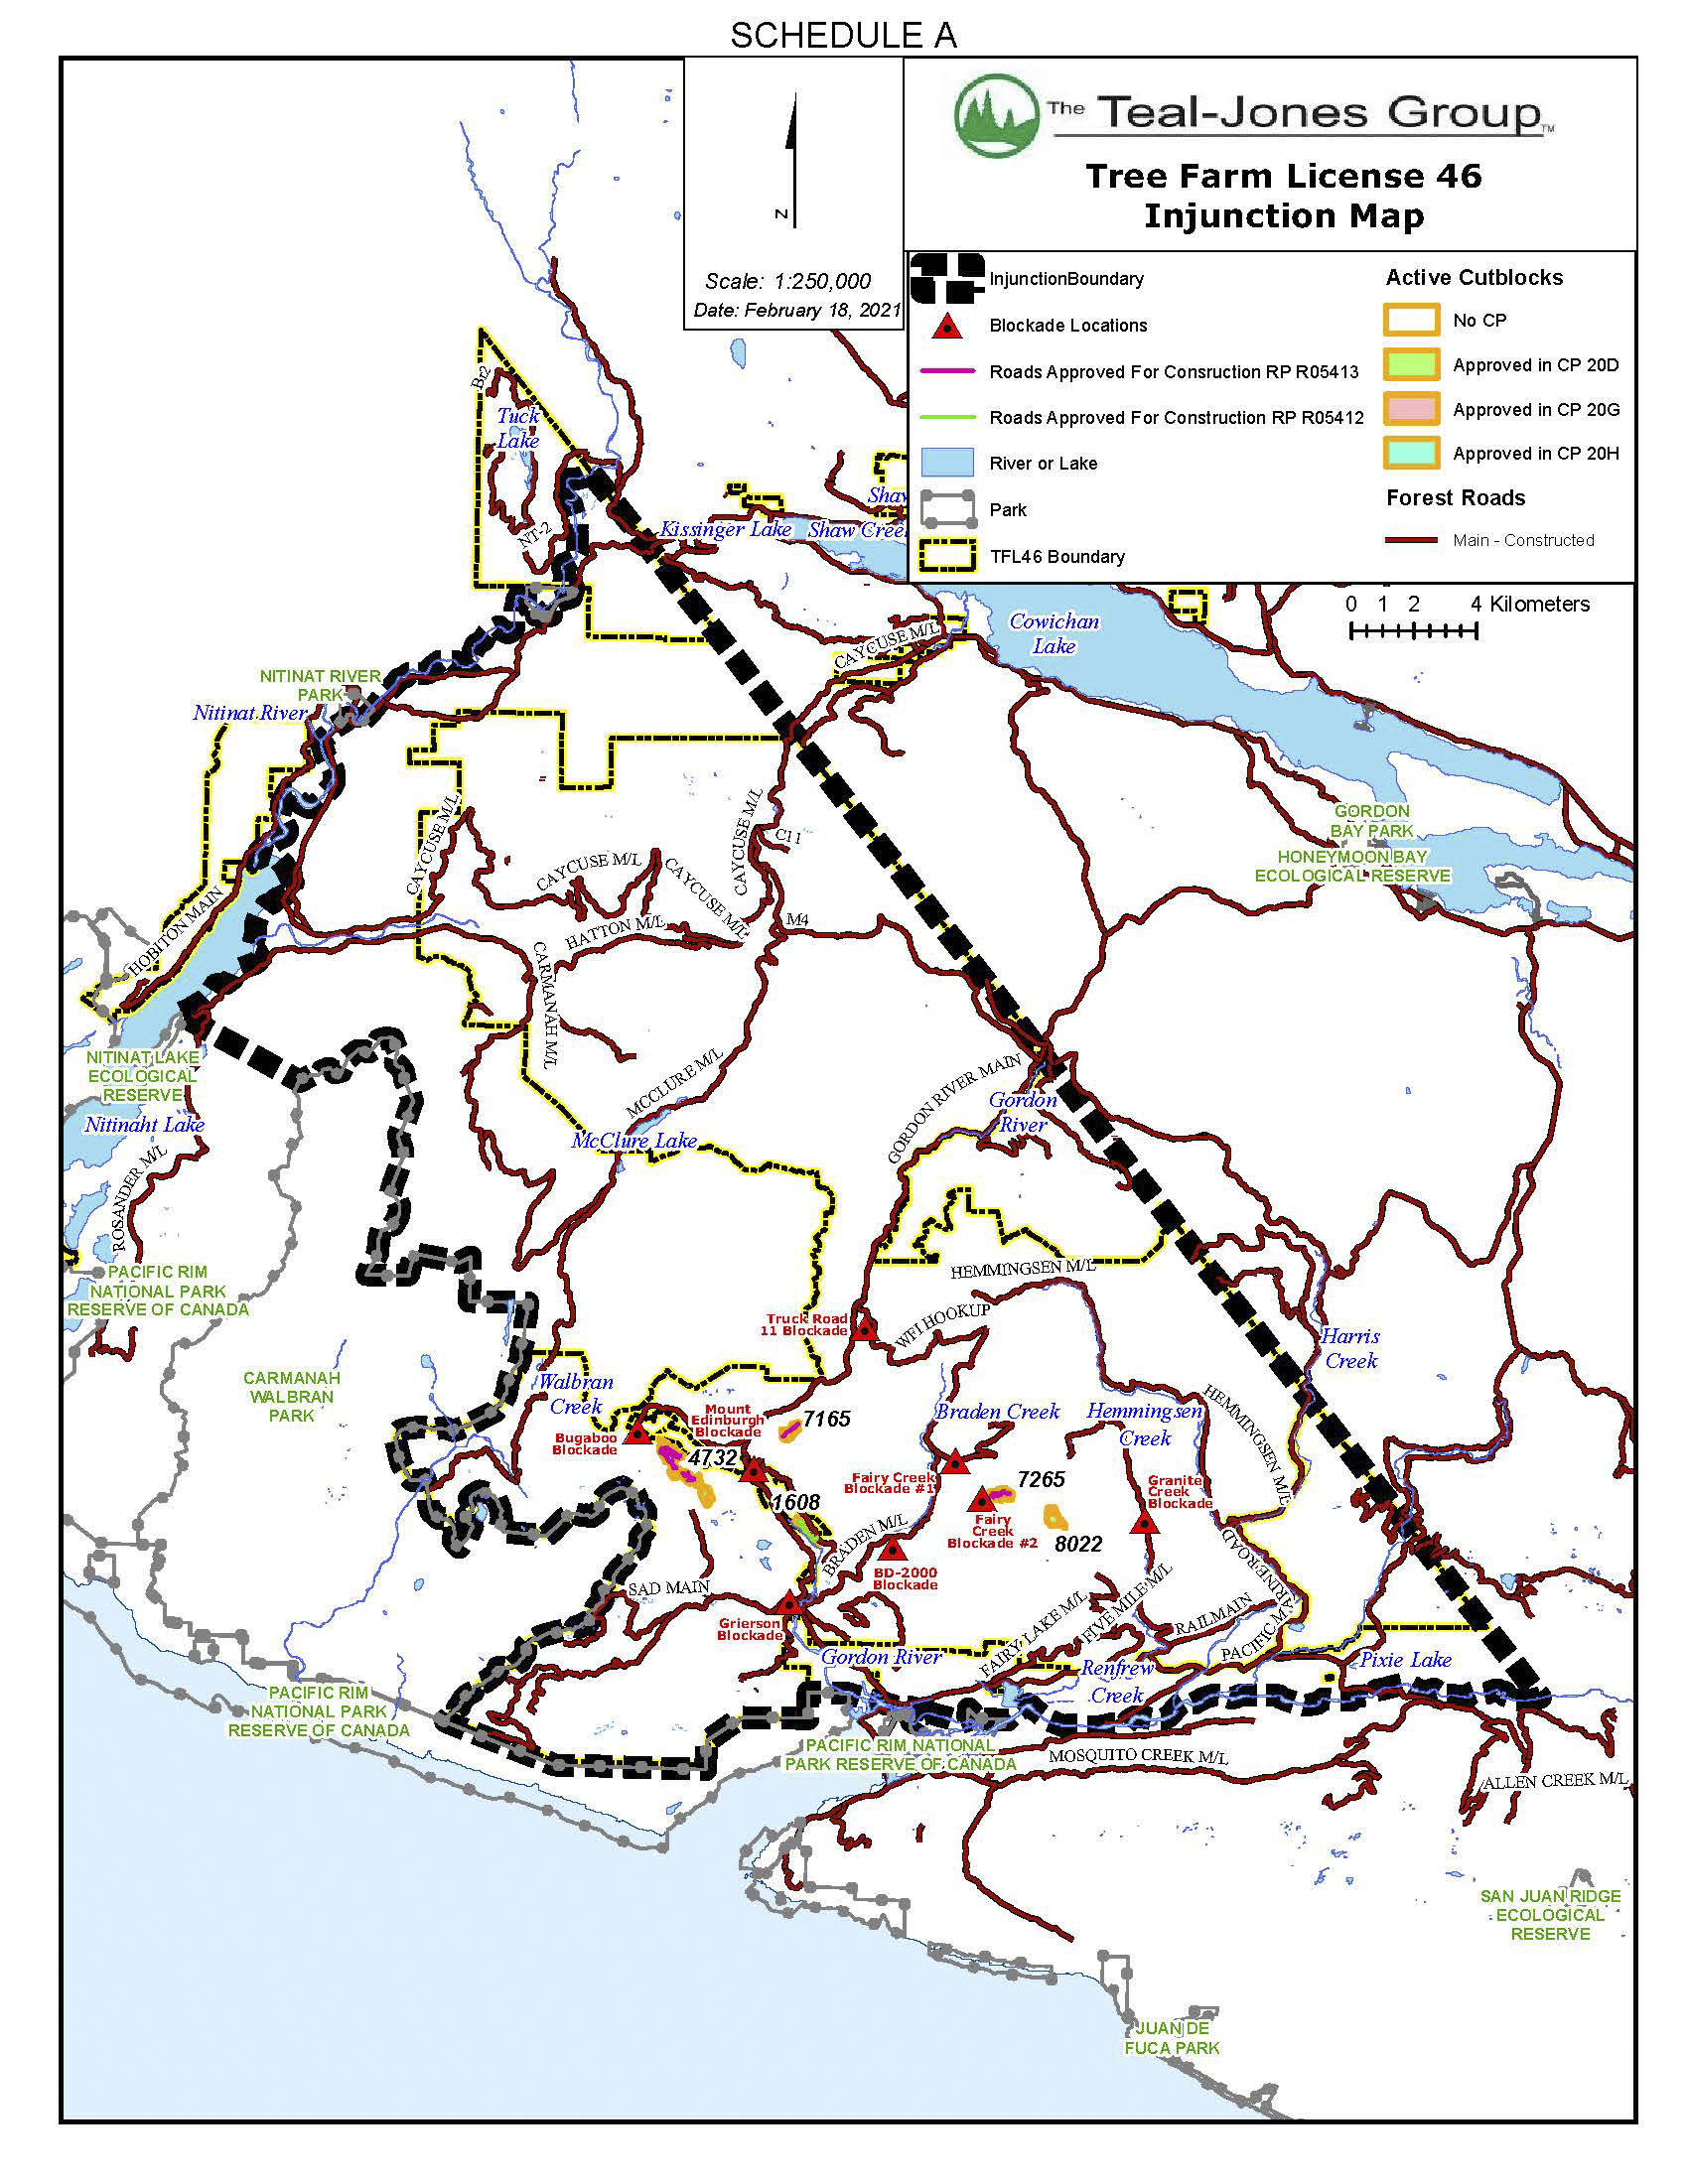 25299370_web1_210603-CCI-logging-protest-update-may-25-PUSH-BC-map_1